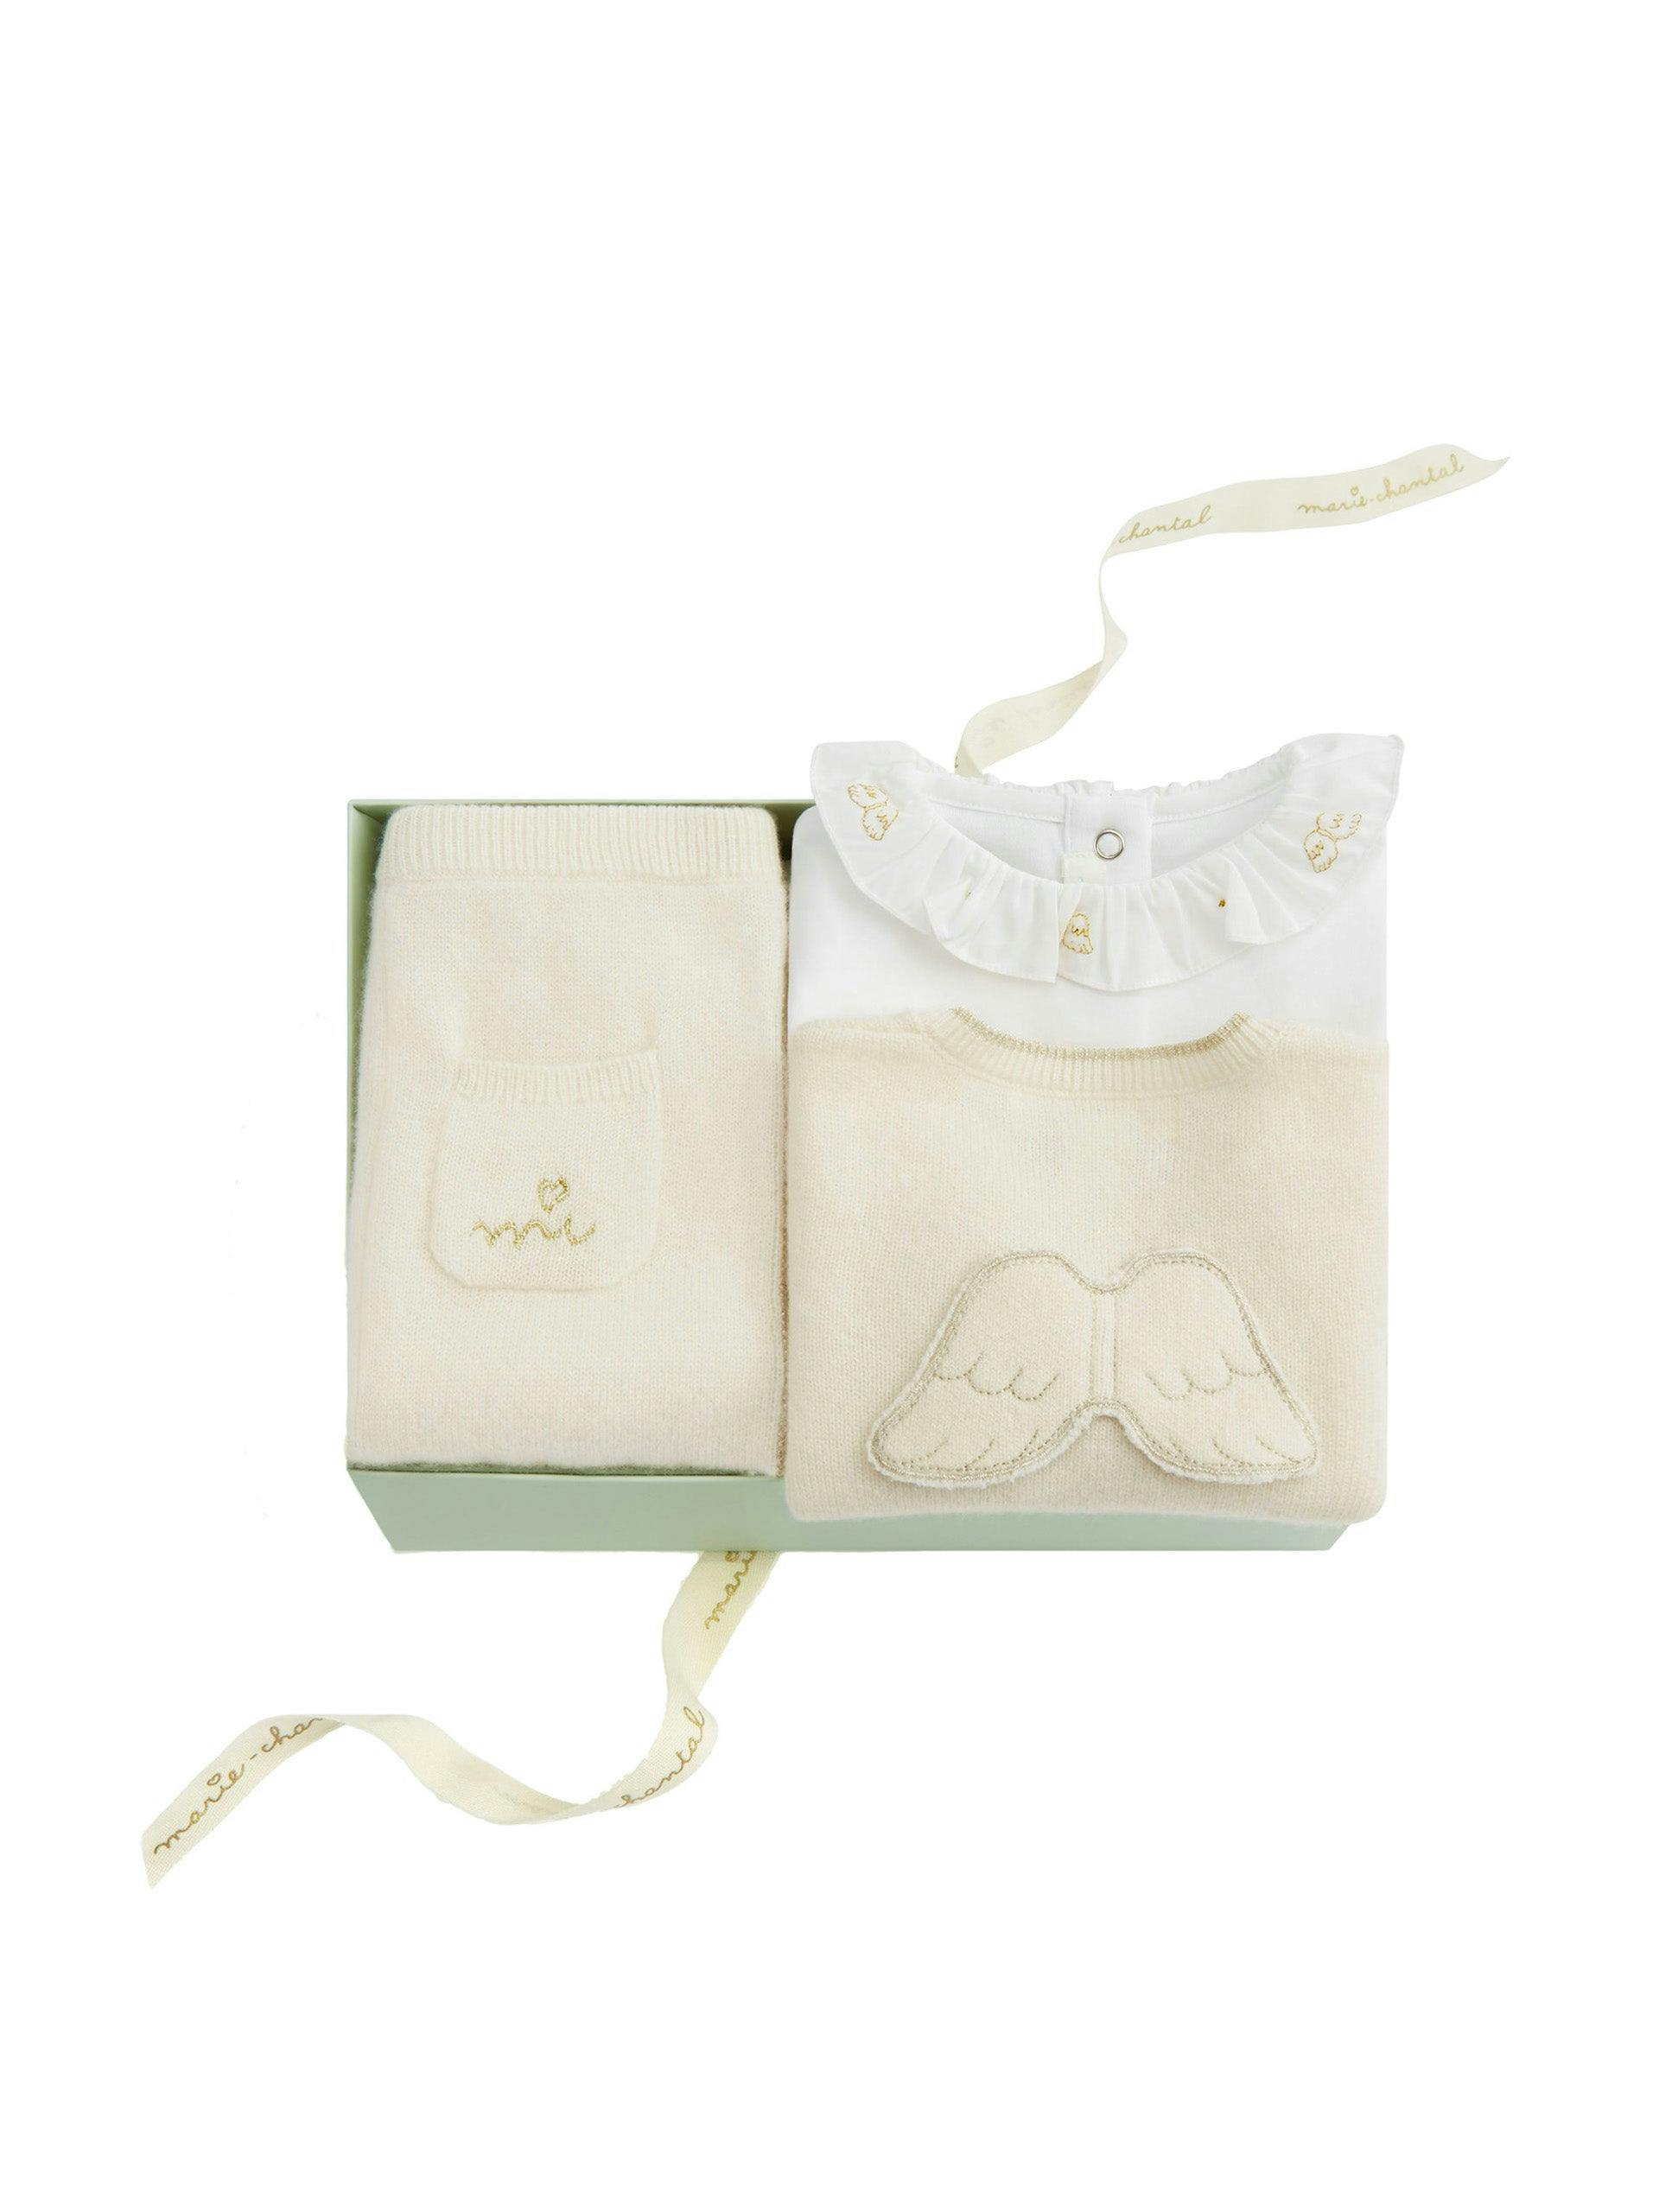 The Little Cashmere gift set